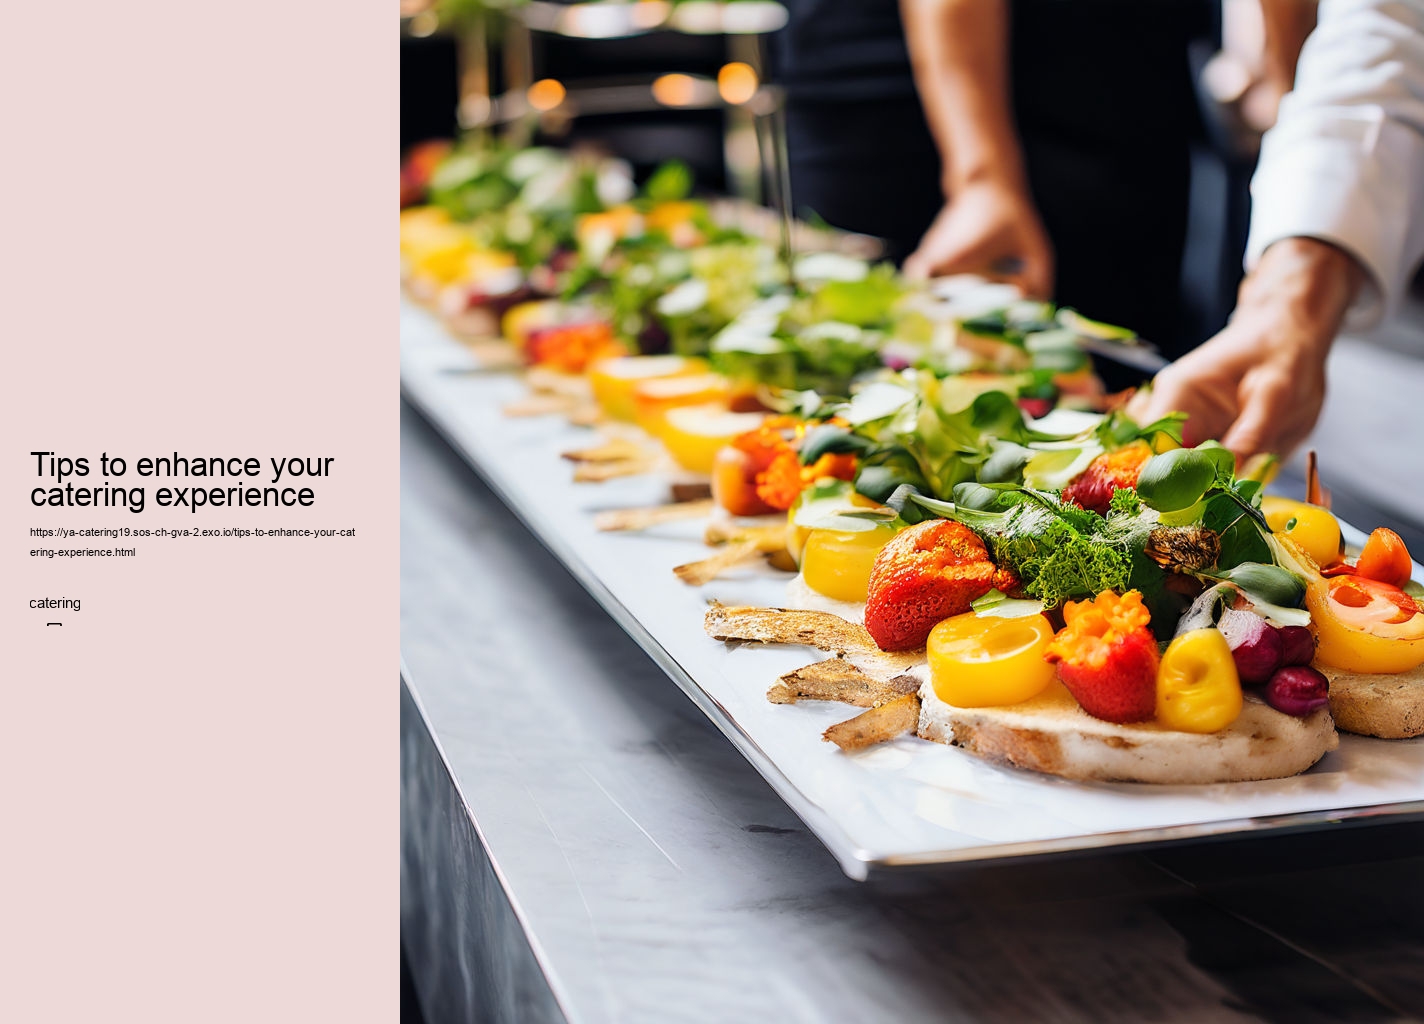 Tips to enhance your catering experience